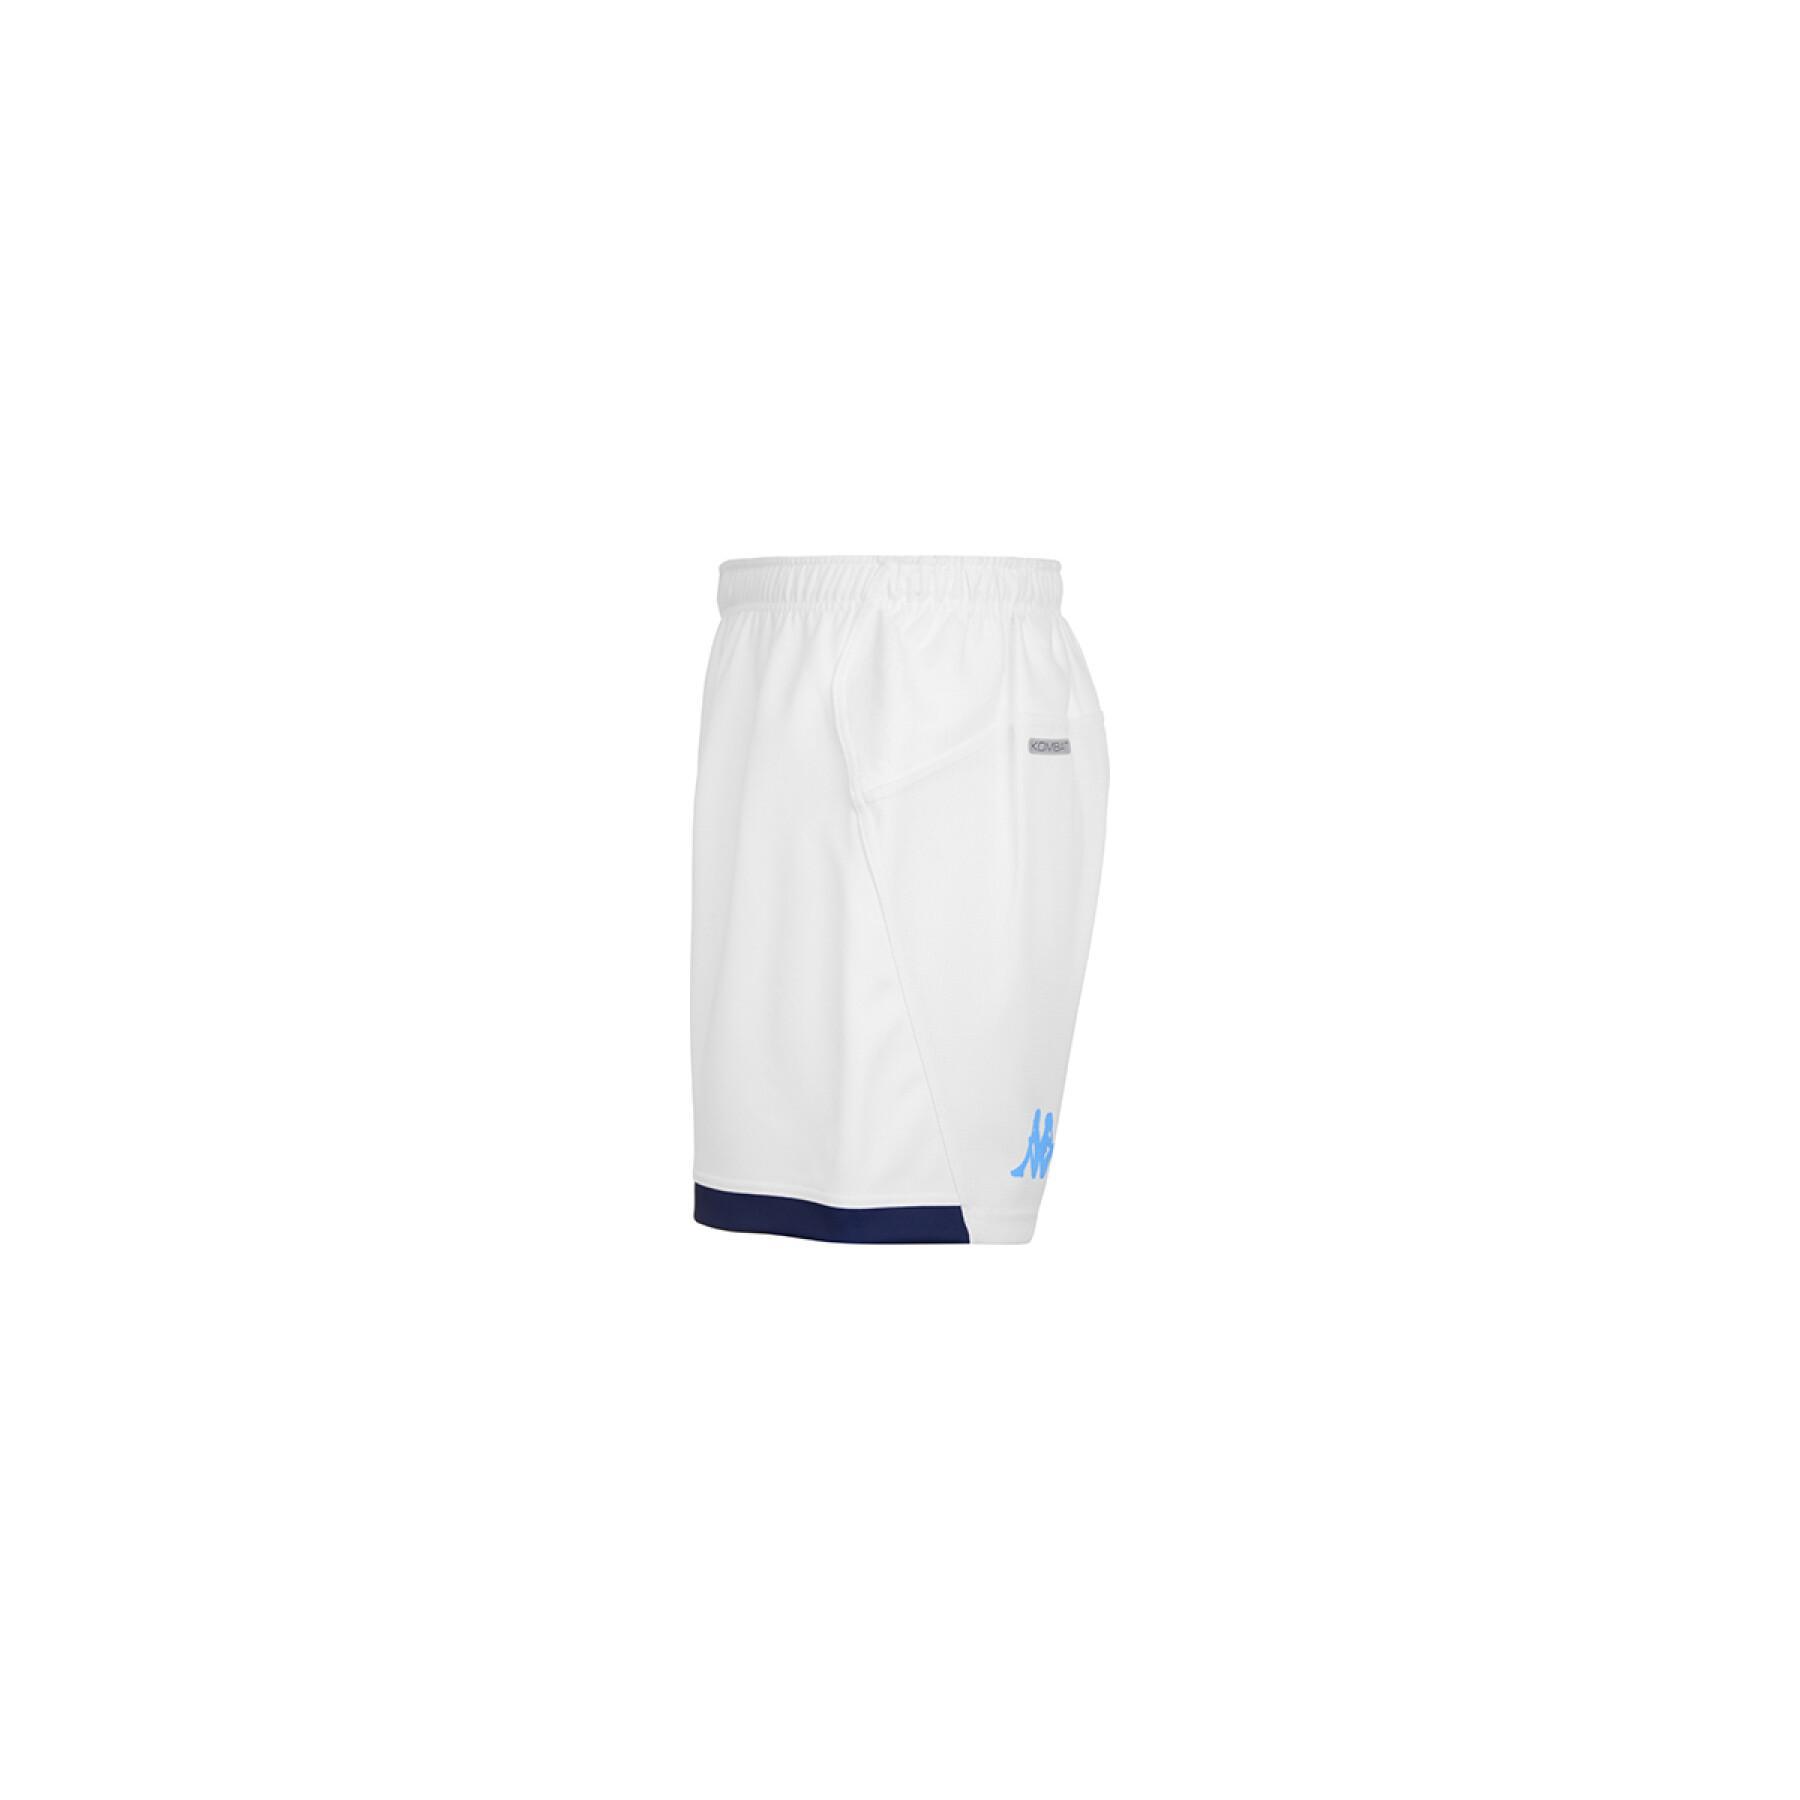 Home shorts Montpellier Hérault Rugby 2019/20